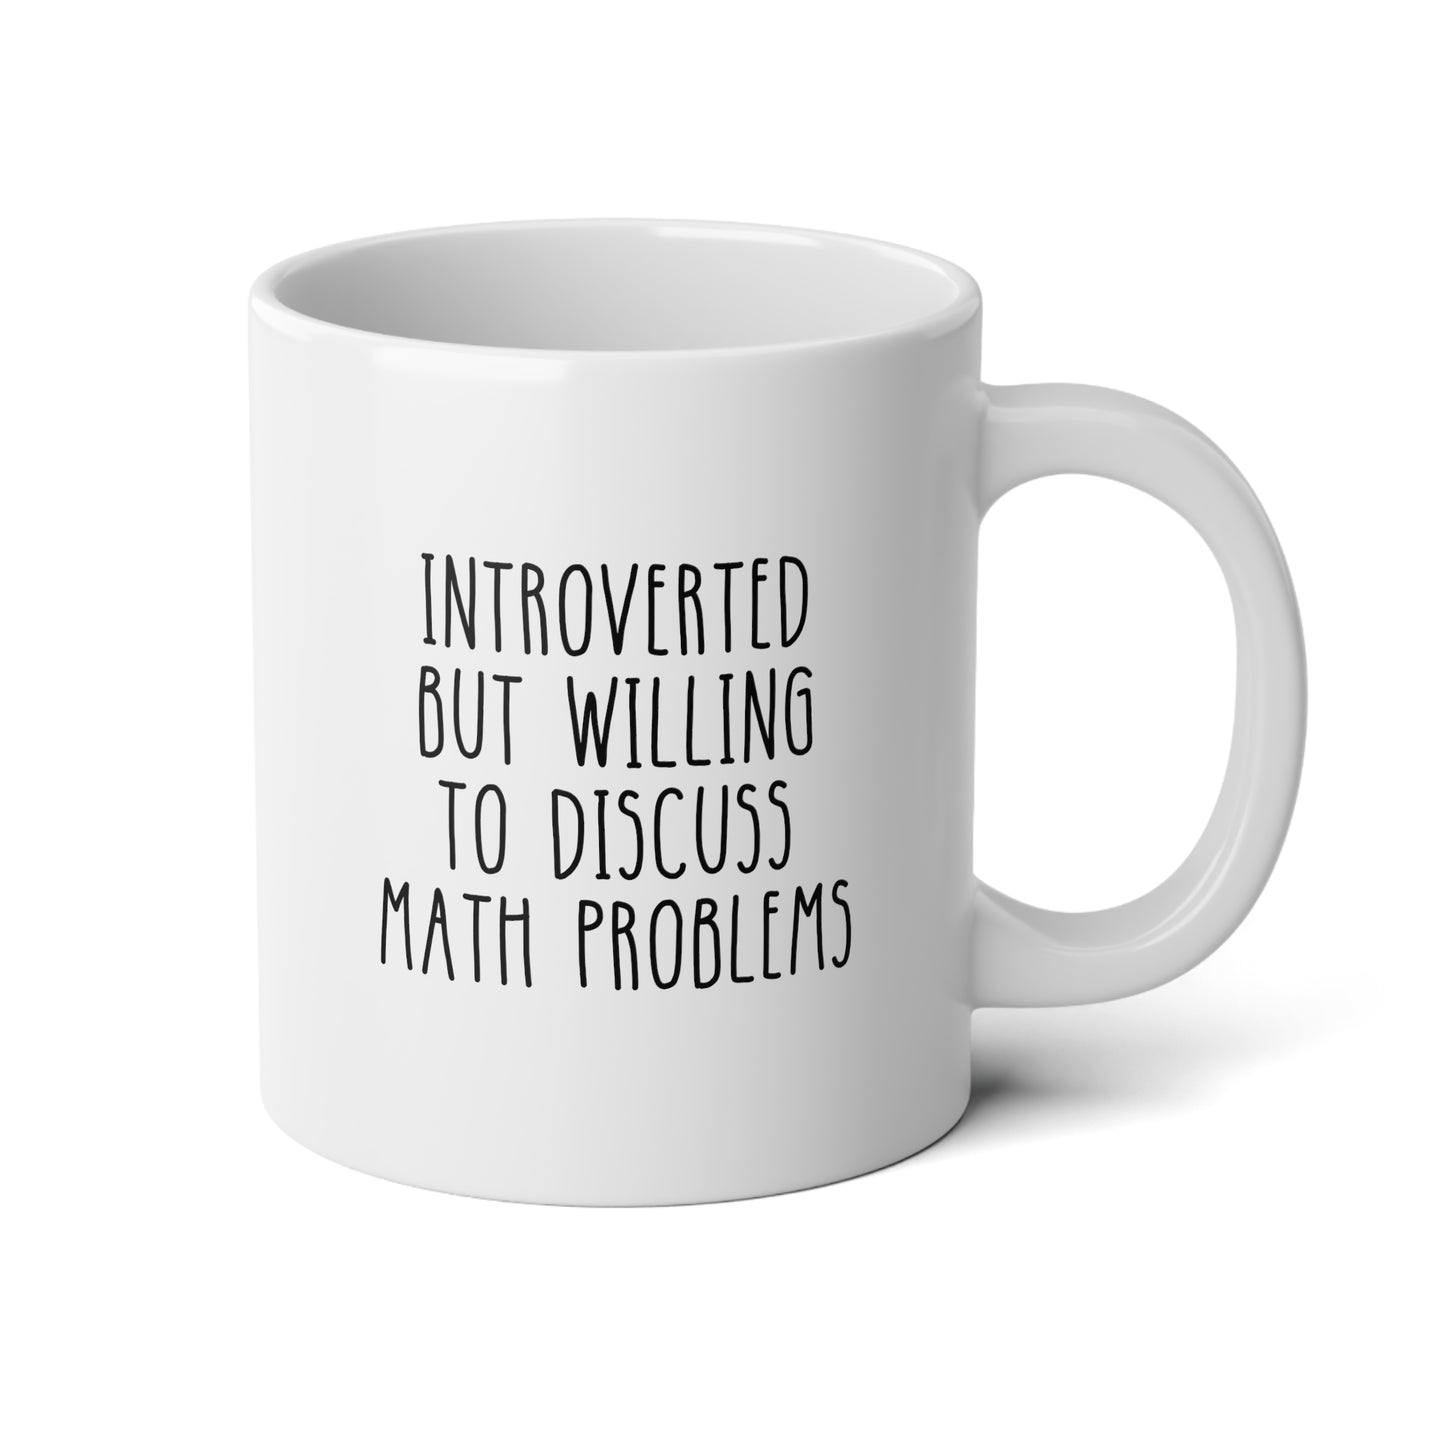 Introverted But Willing To Discuss Math Problems 20oz white funny large coffee mug gift for introvert mathematics geek accountant maths teacher waveywares wavey wares wavywares wavy wares